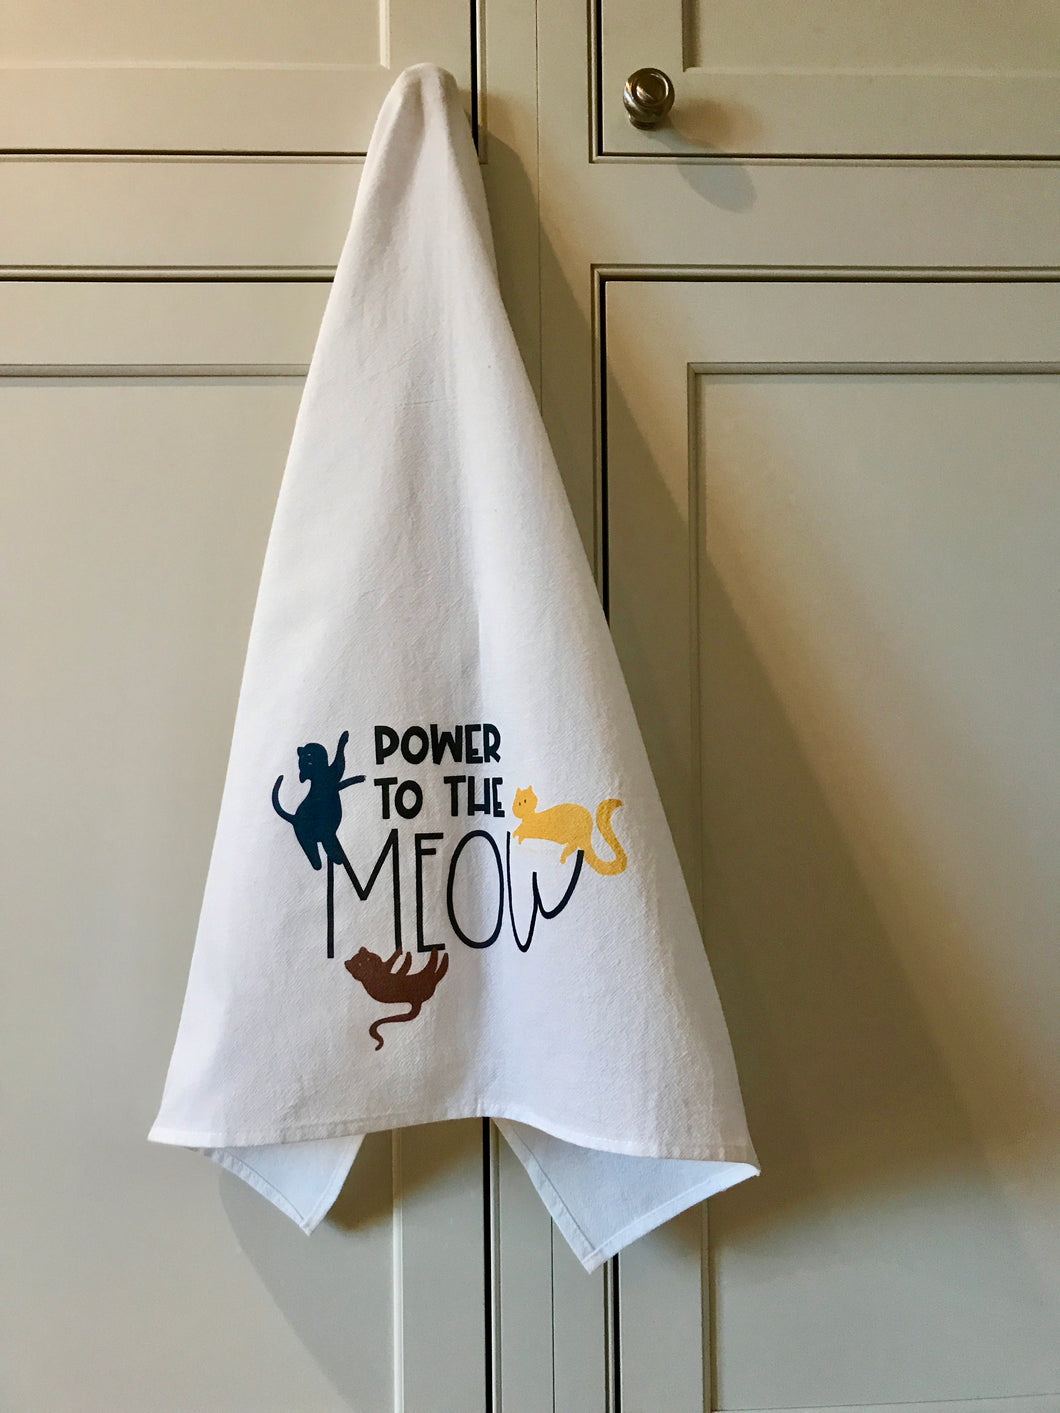 Hand Dish Cat Towel - Power To The Meow